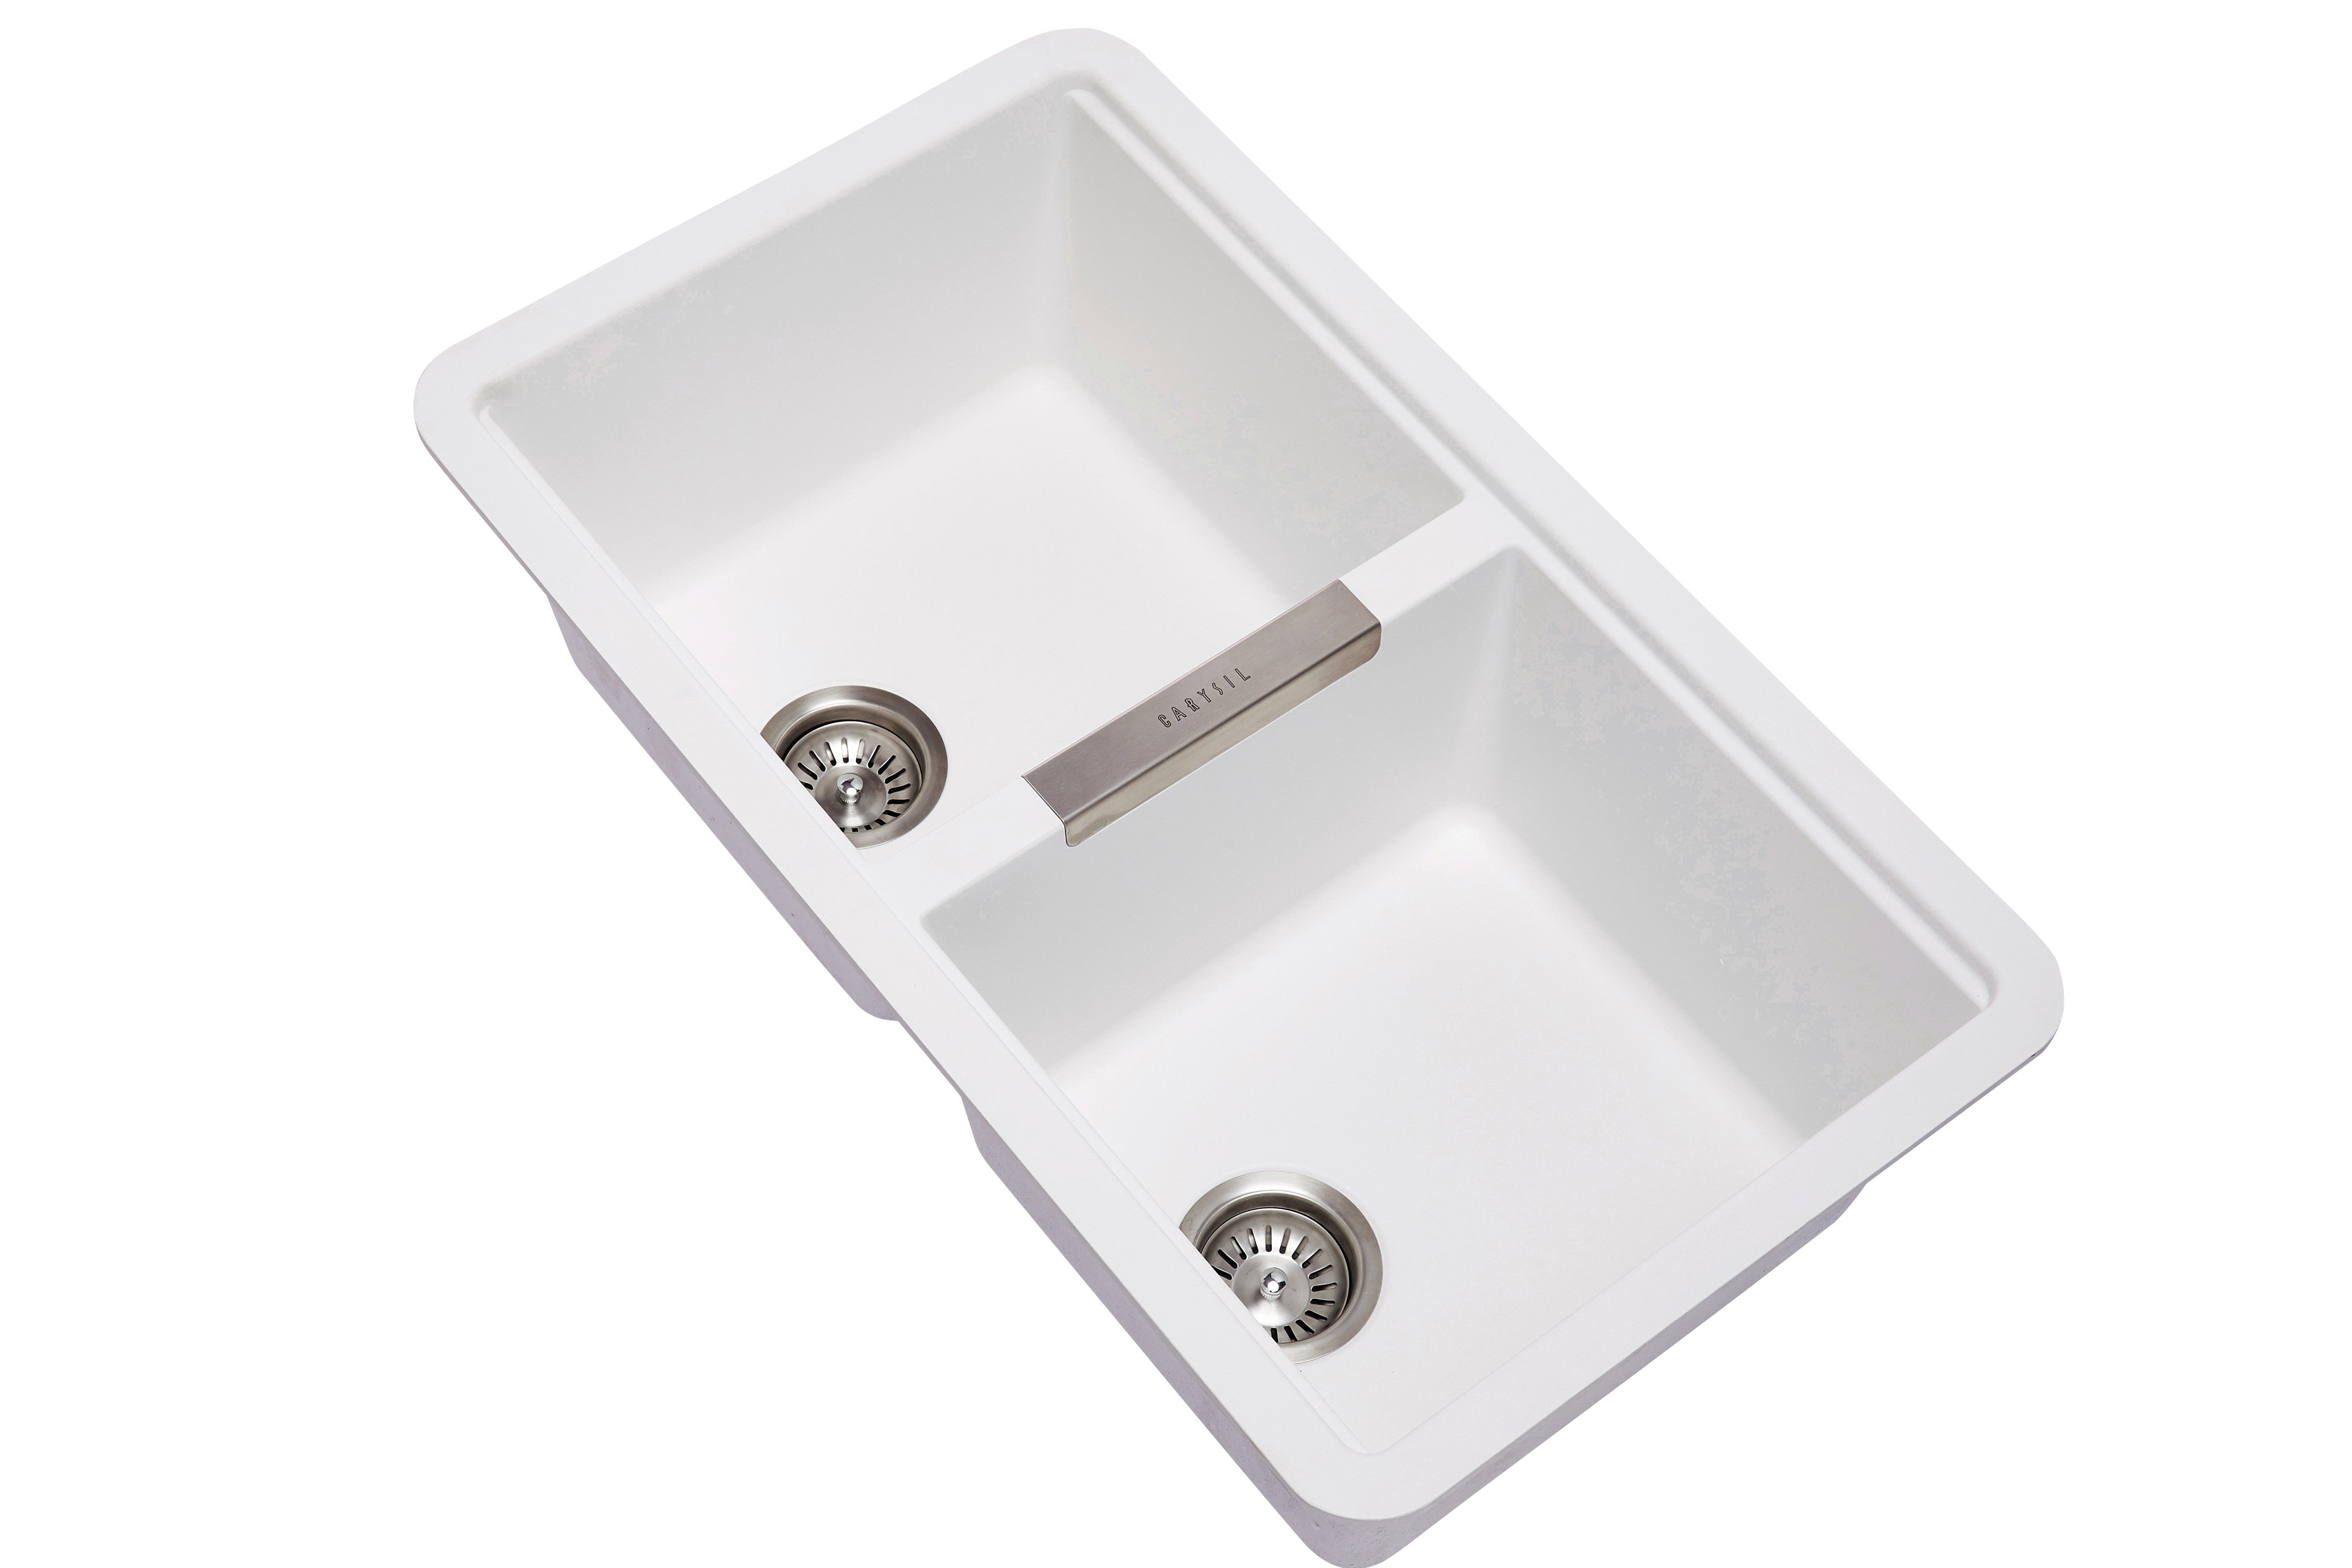 Carysil CGDB Double Bowl Granite Kitchen Sink Undermount only 824*481*241mm